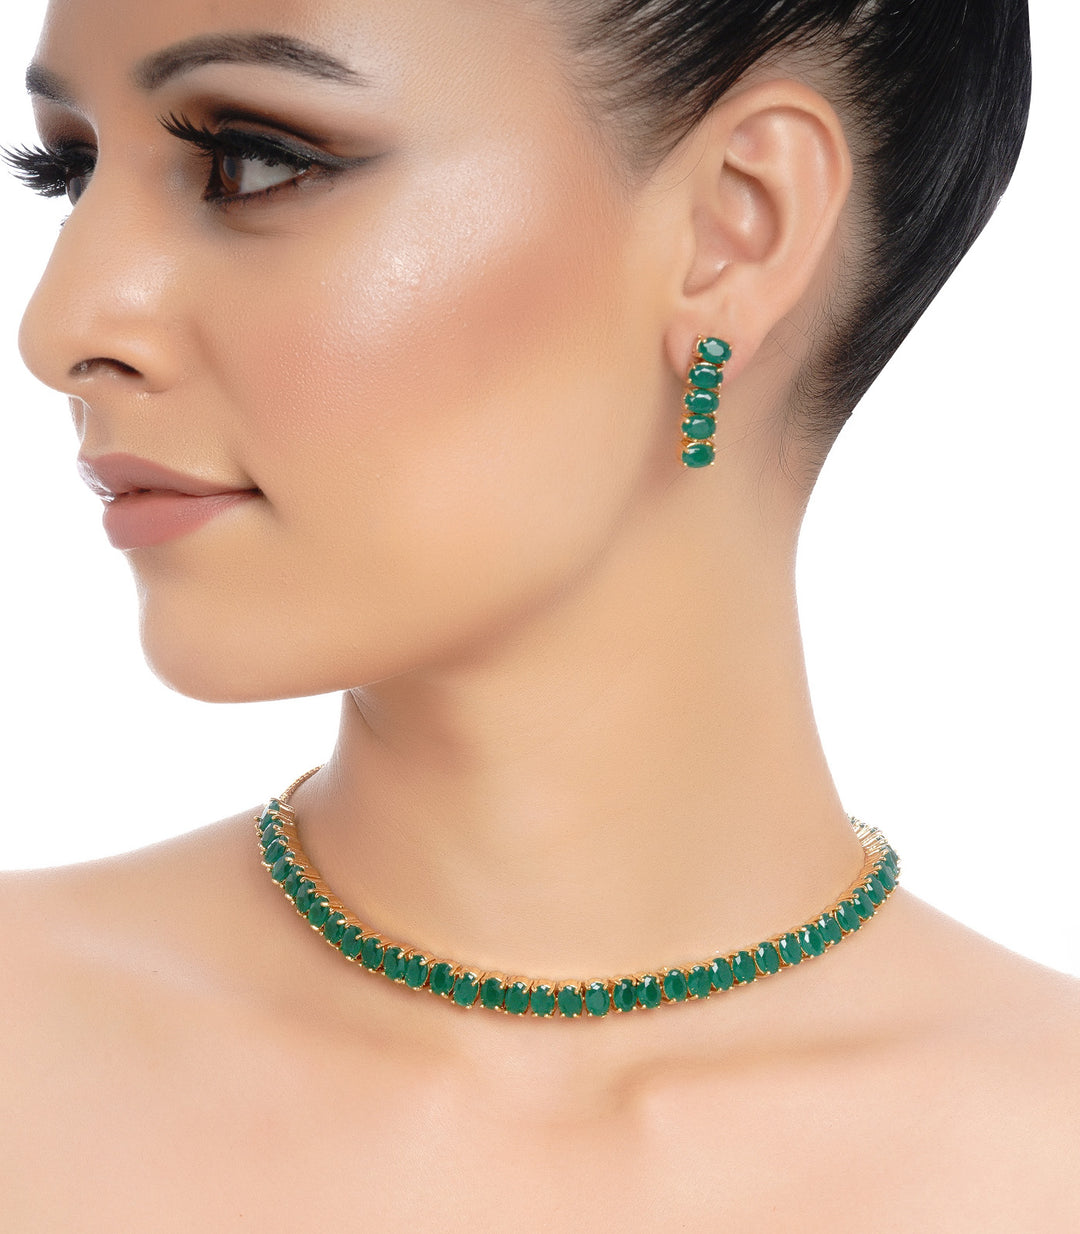 SMALL SINGLE LINE GREEN NECKLACE SET WITH HOOK & LINKS